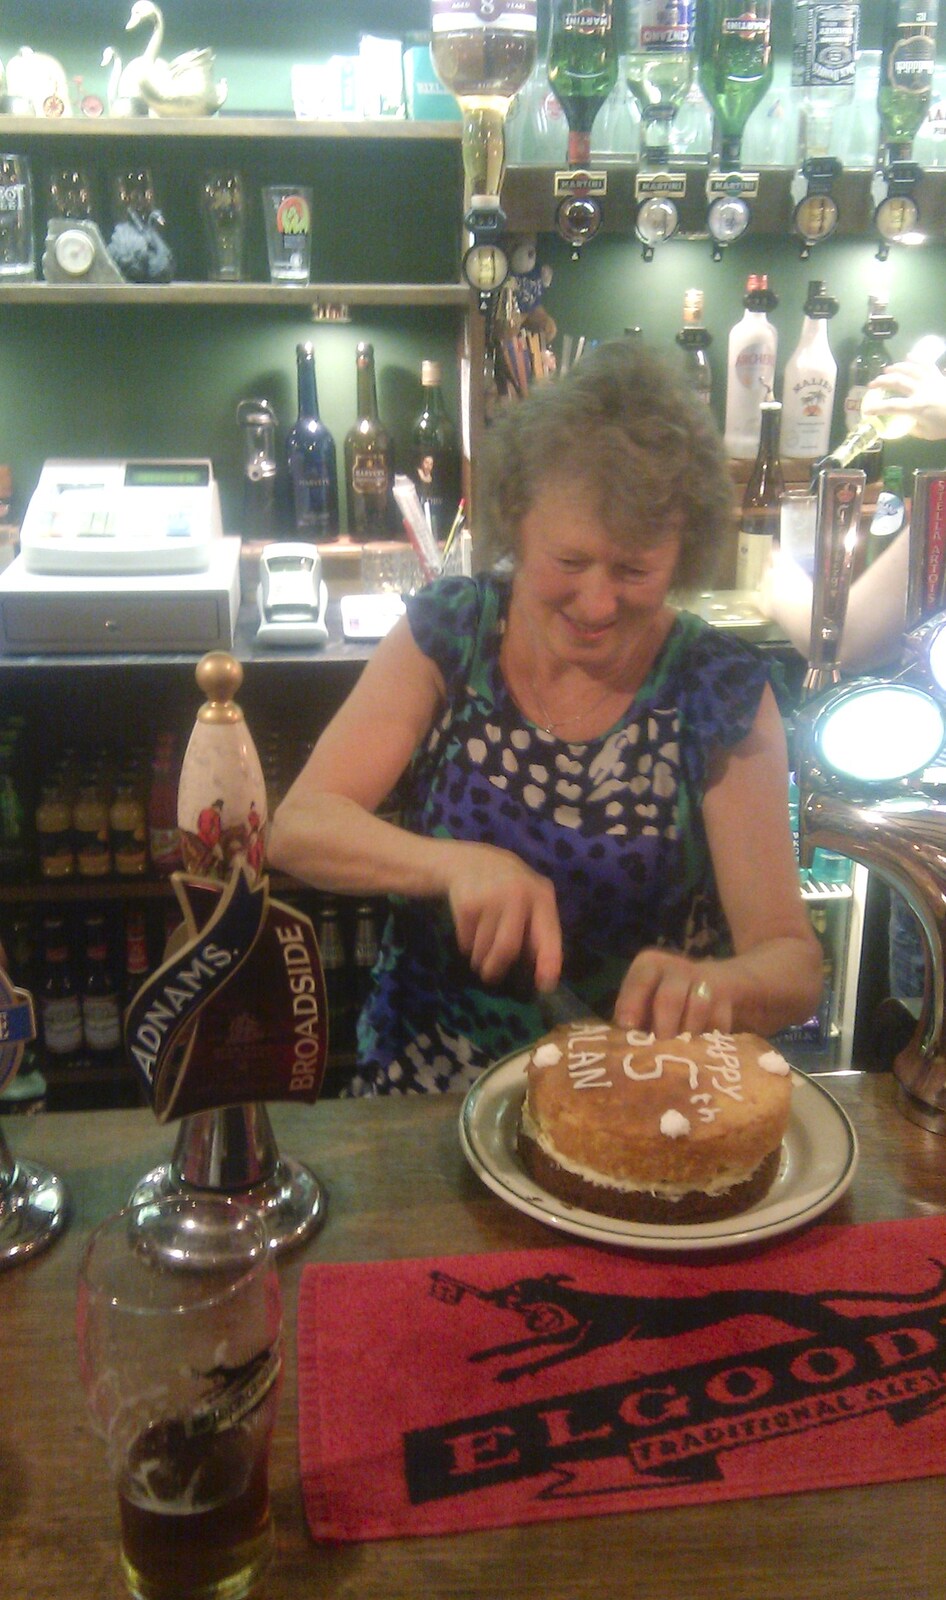 Sylvia cuts the cake from Barbeque at the Swan Inn, Brome, Suffolk - 5th August 2011